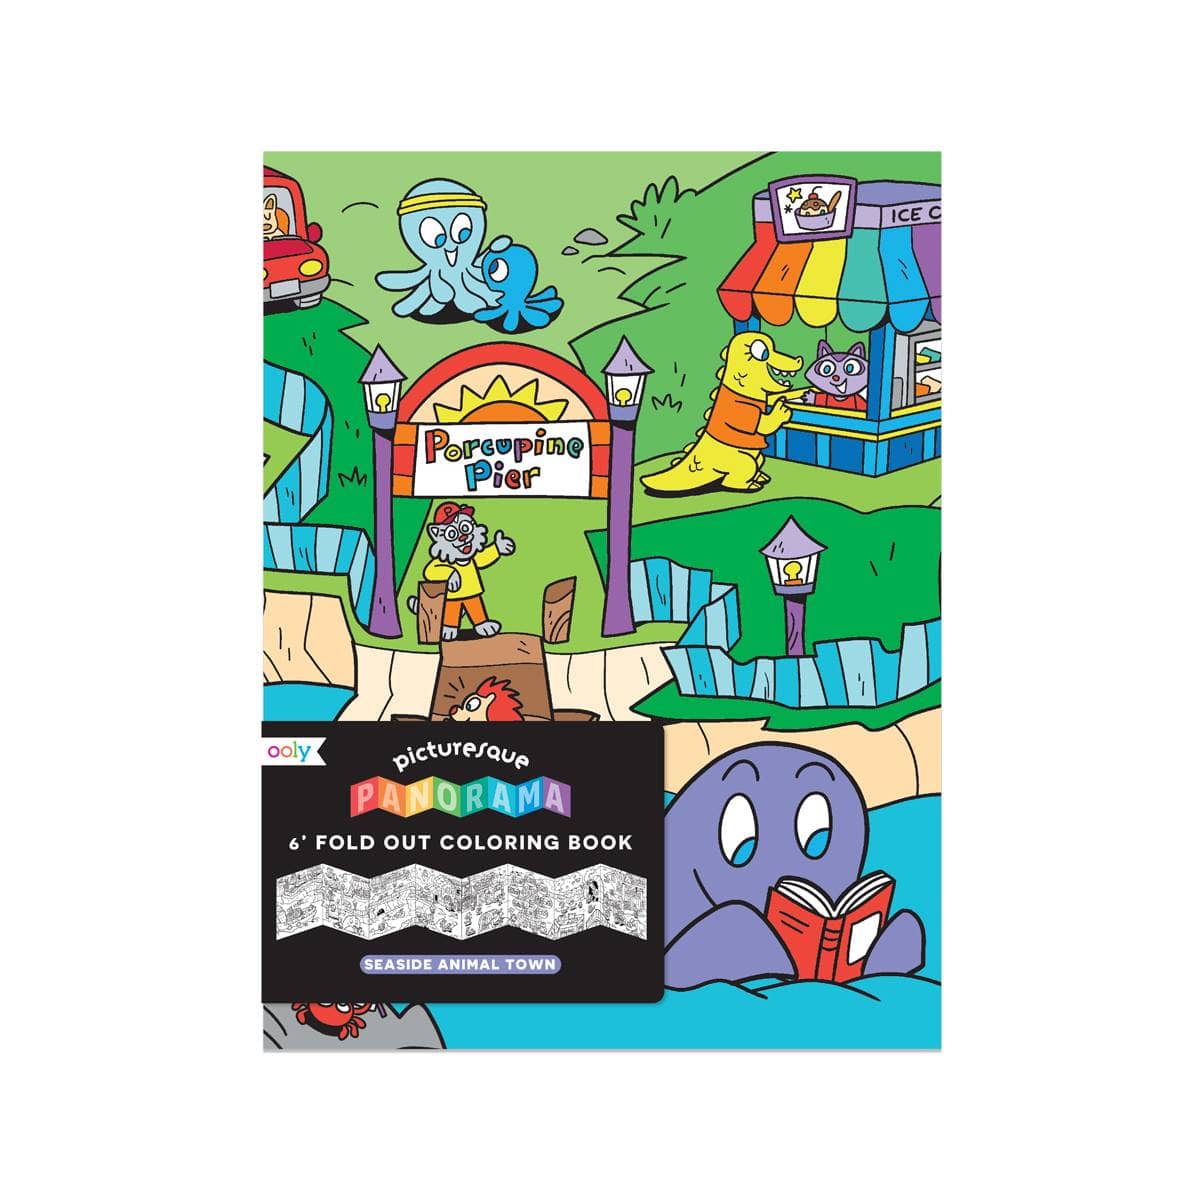 Ooly Toys Seaside Animal Town - Panorama Colouring Book